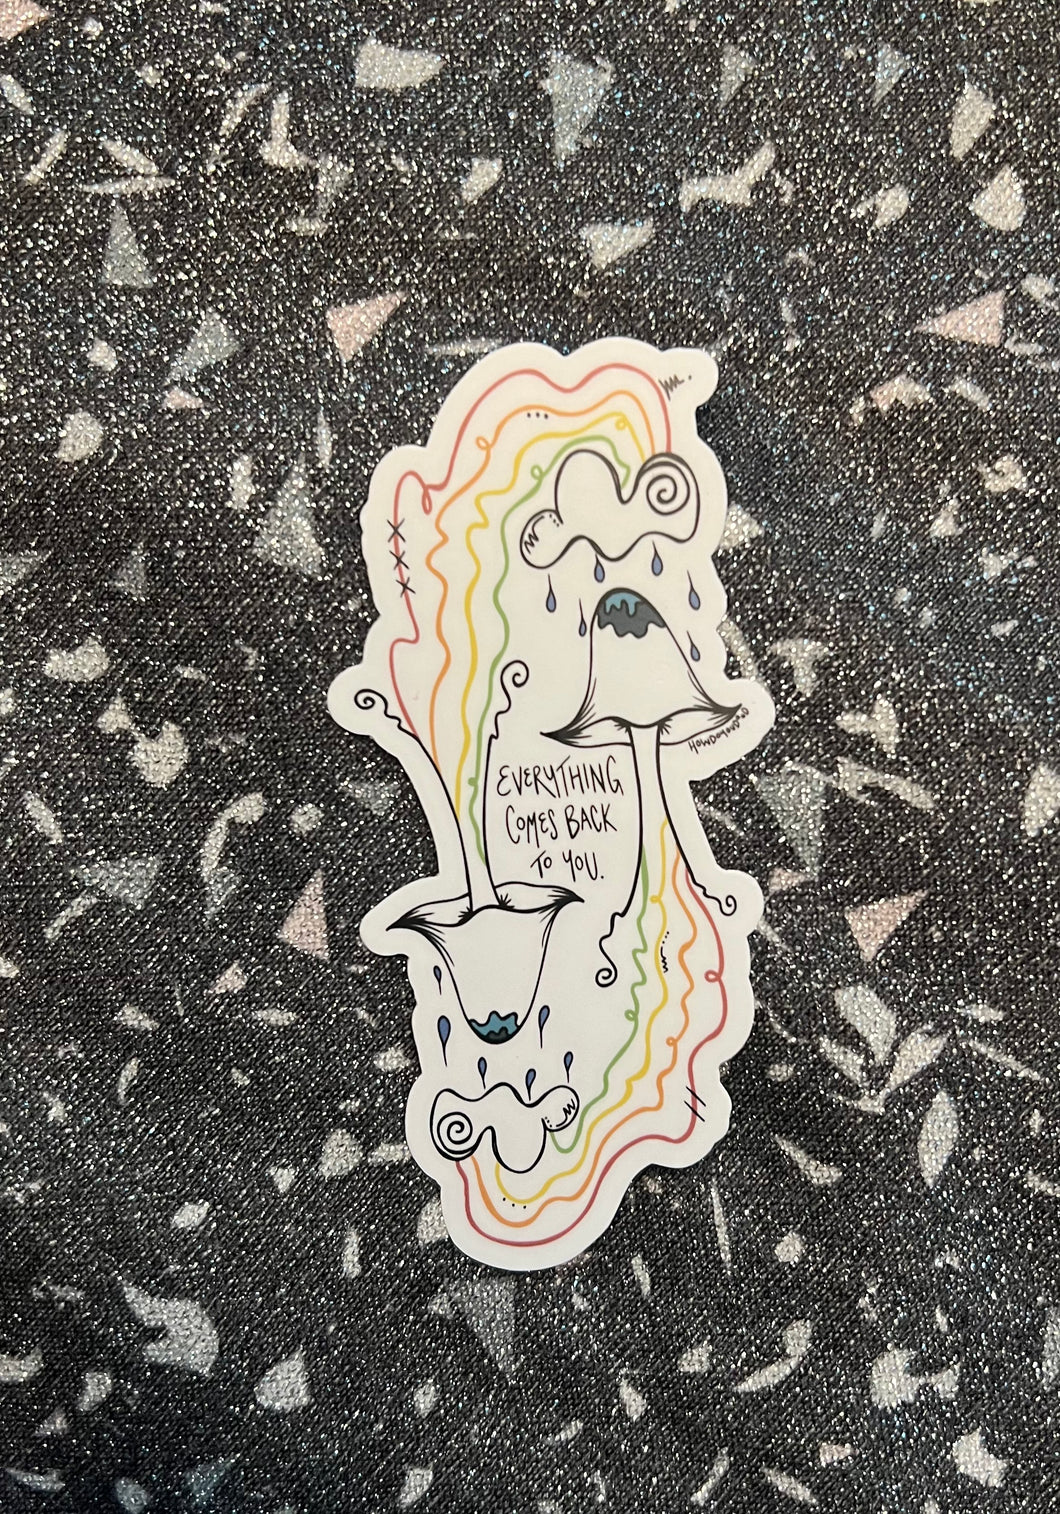 Everything Comes Back to You Sticker